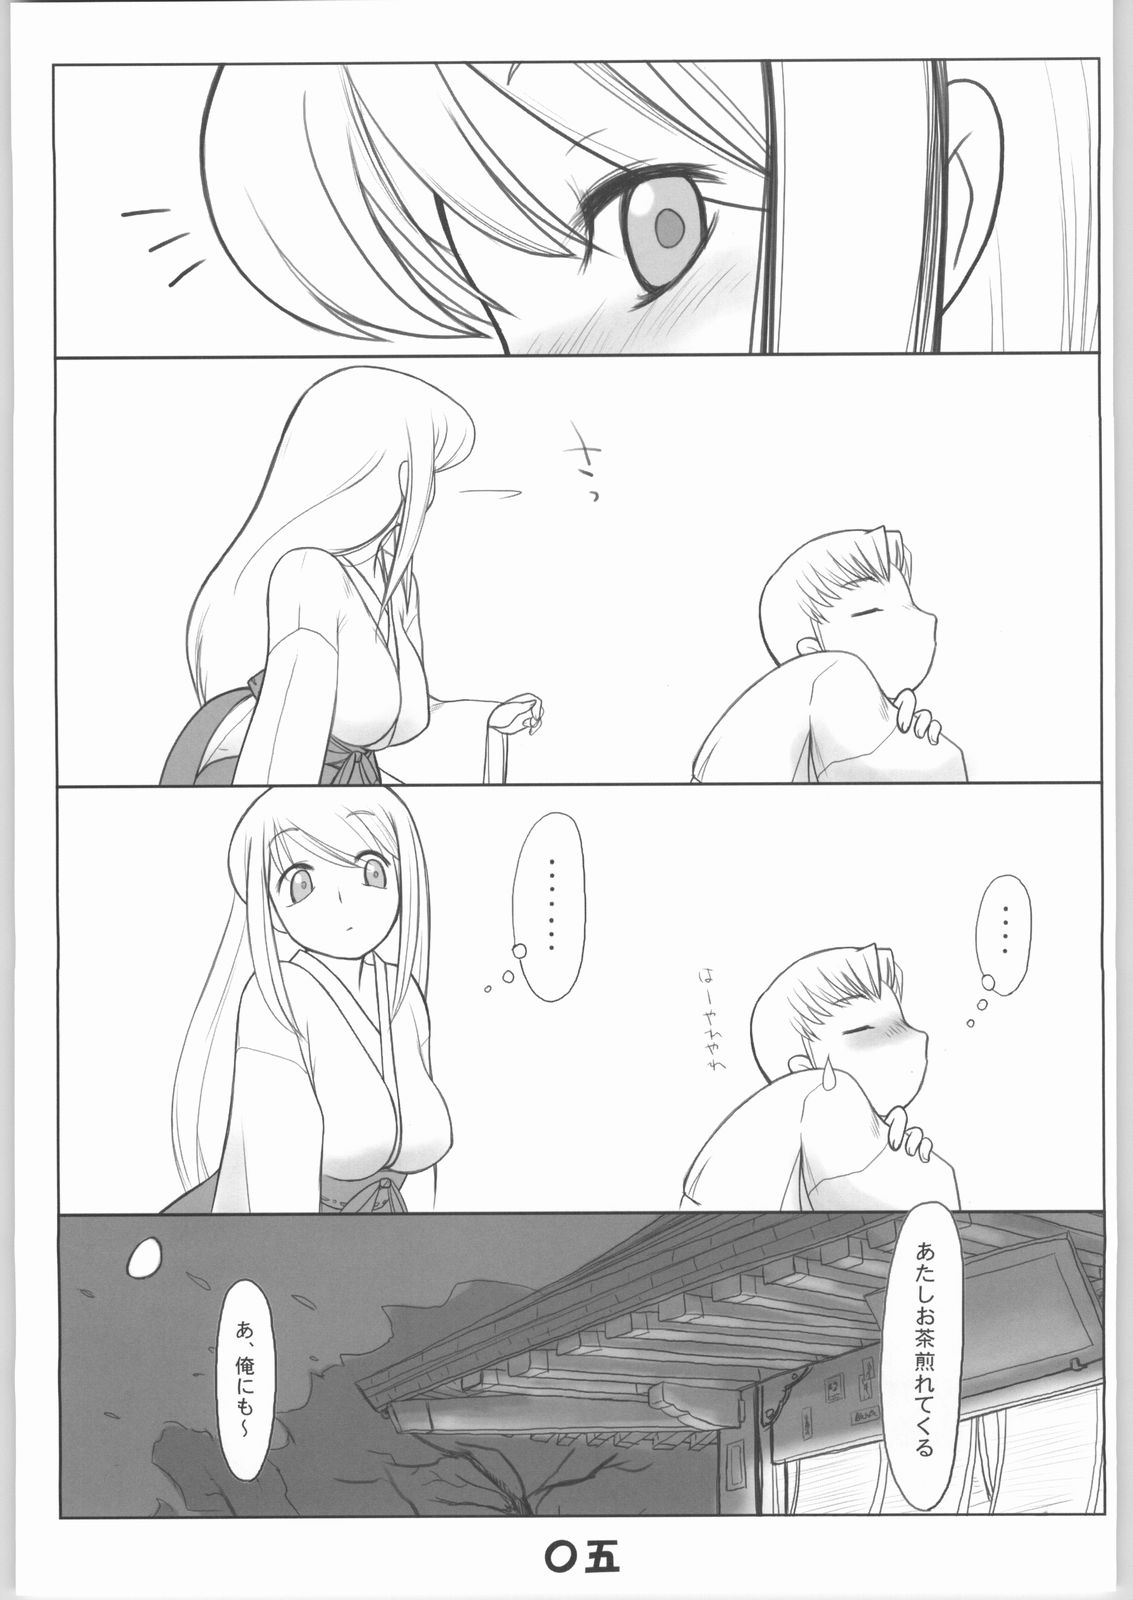 [Oblate] 春告鳥 (THE iDOLM@STER) page 4 full